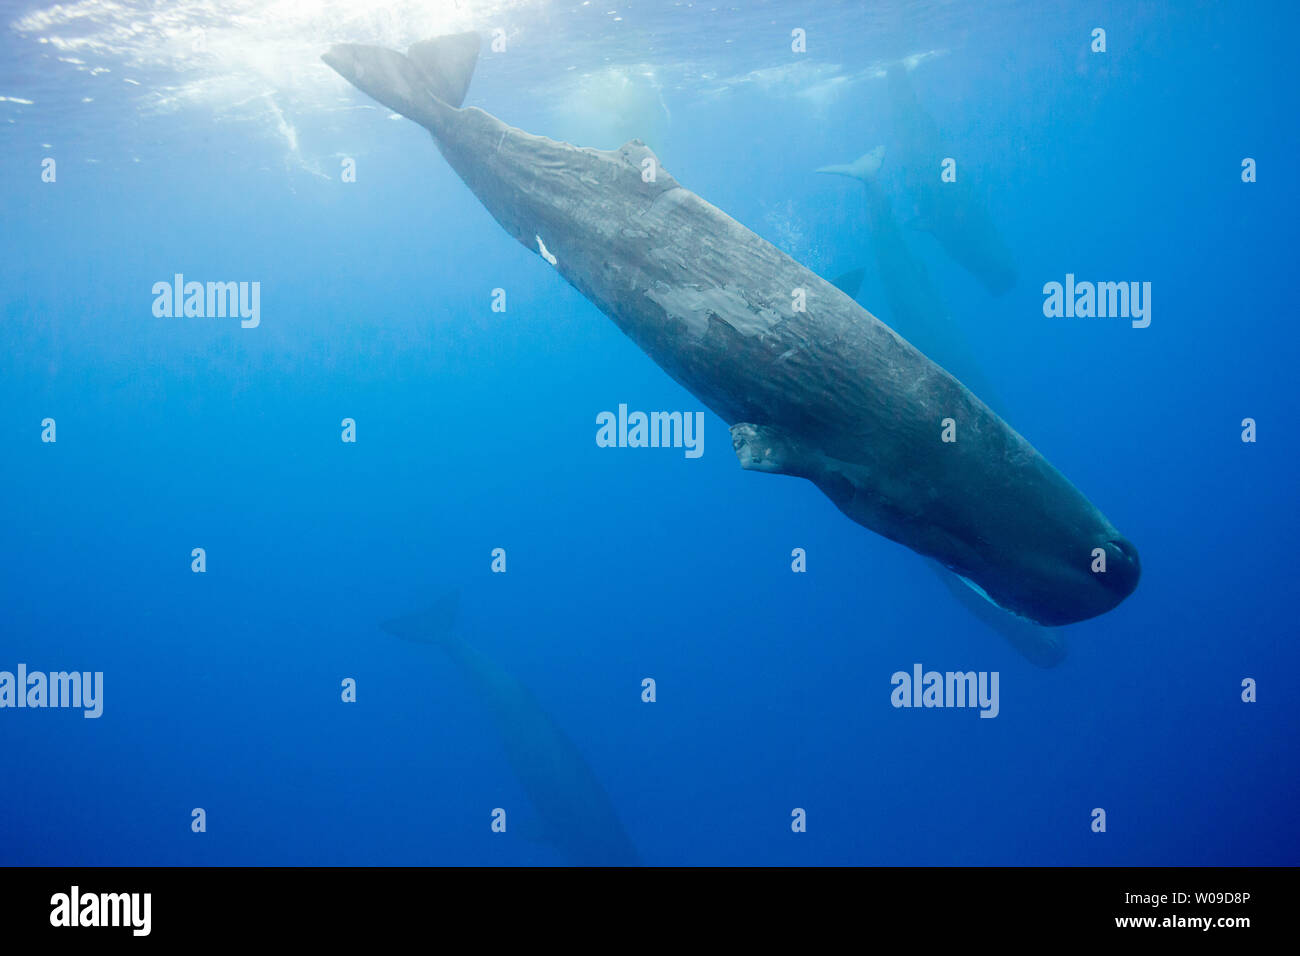 The sperm whale, Physeter macrocephalus, is the largest of all the toothed cetaceans.  Males can reach 60 feet in length.  Photographed in the Indian Stock Photo